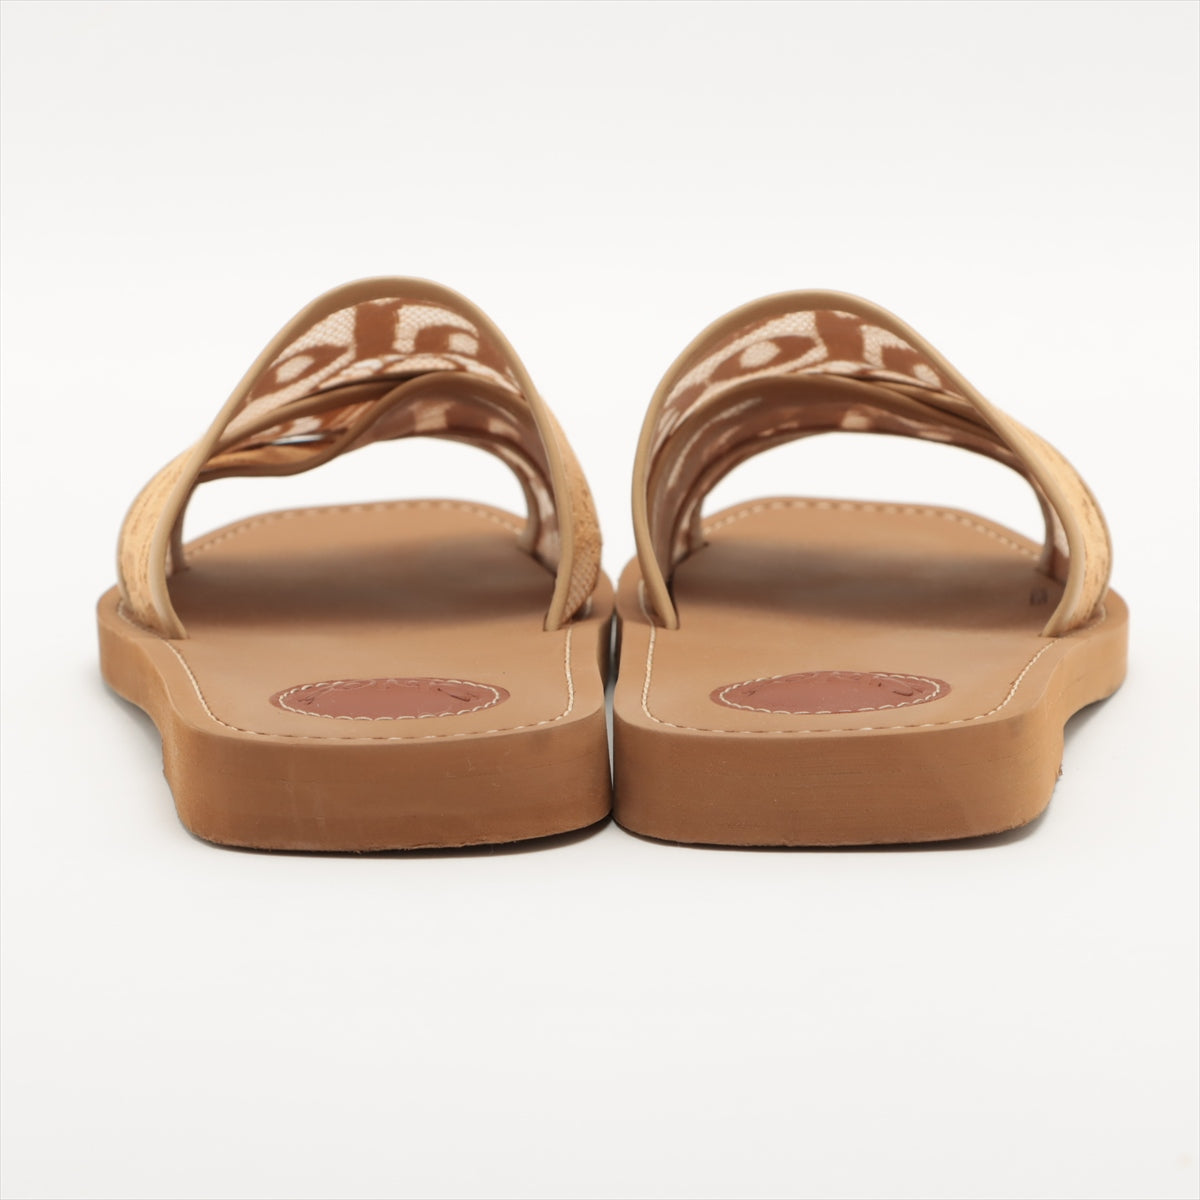 Chloe Woody Rubber Sandals 37 Ladies' Brown 0122253 box There is a bag